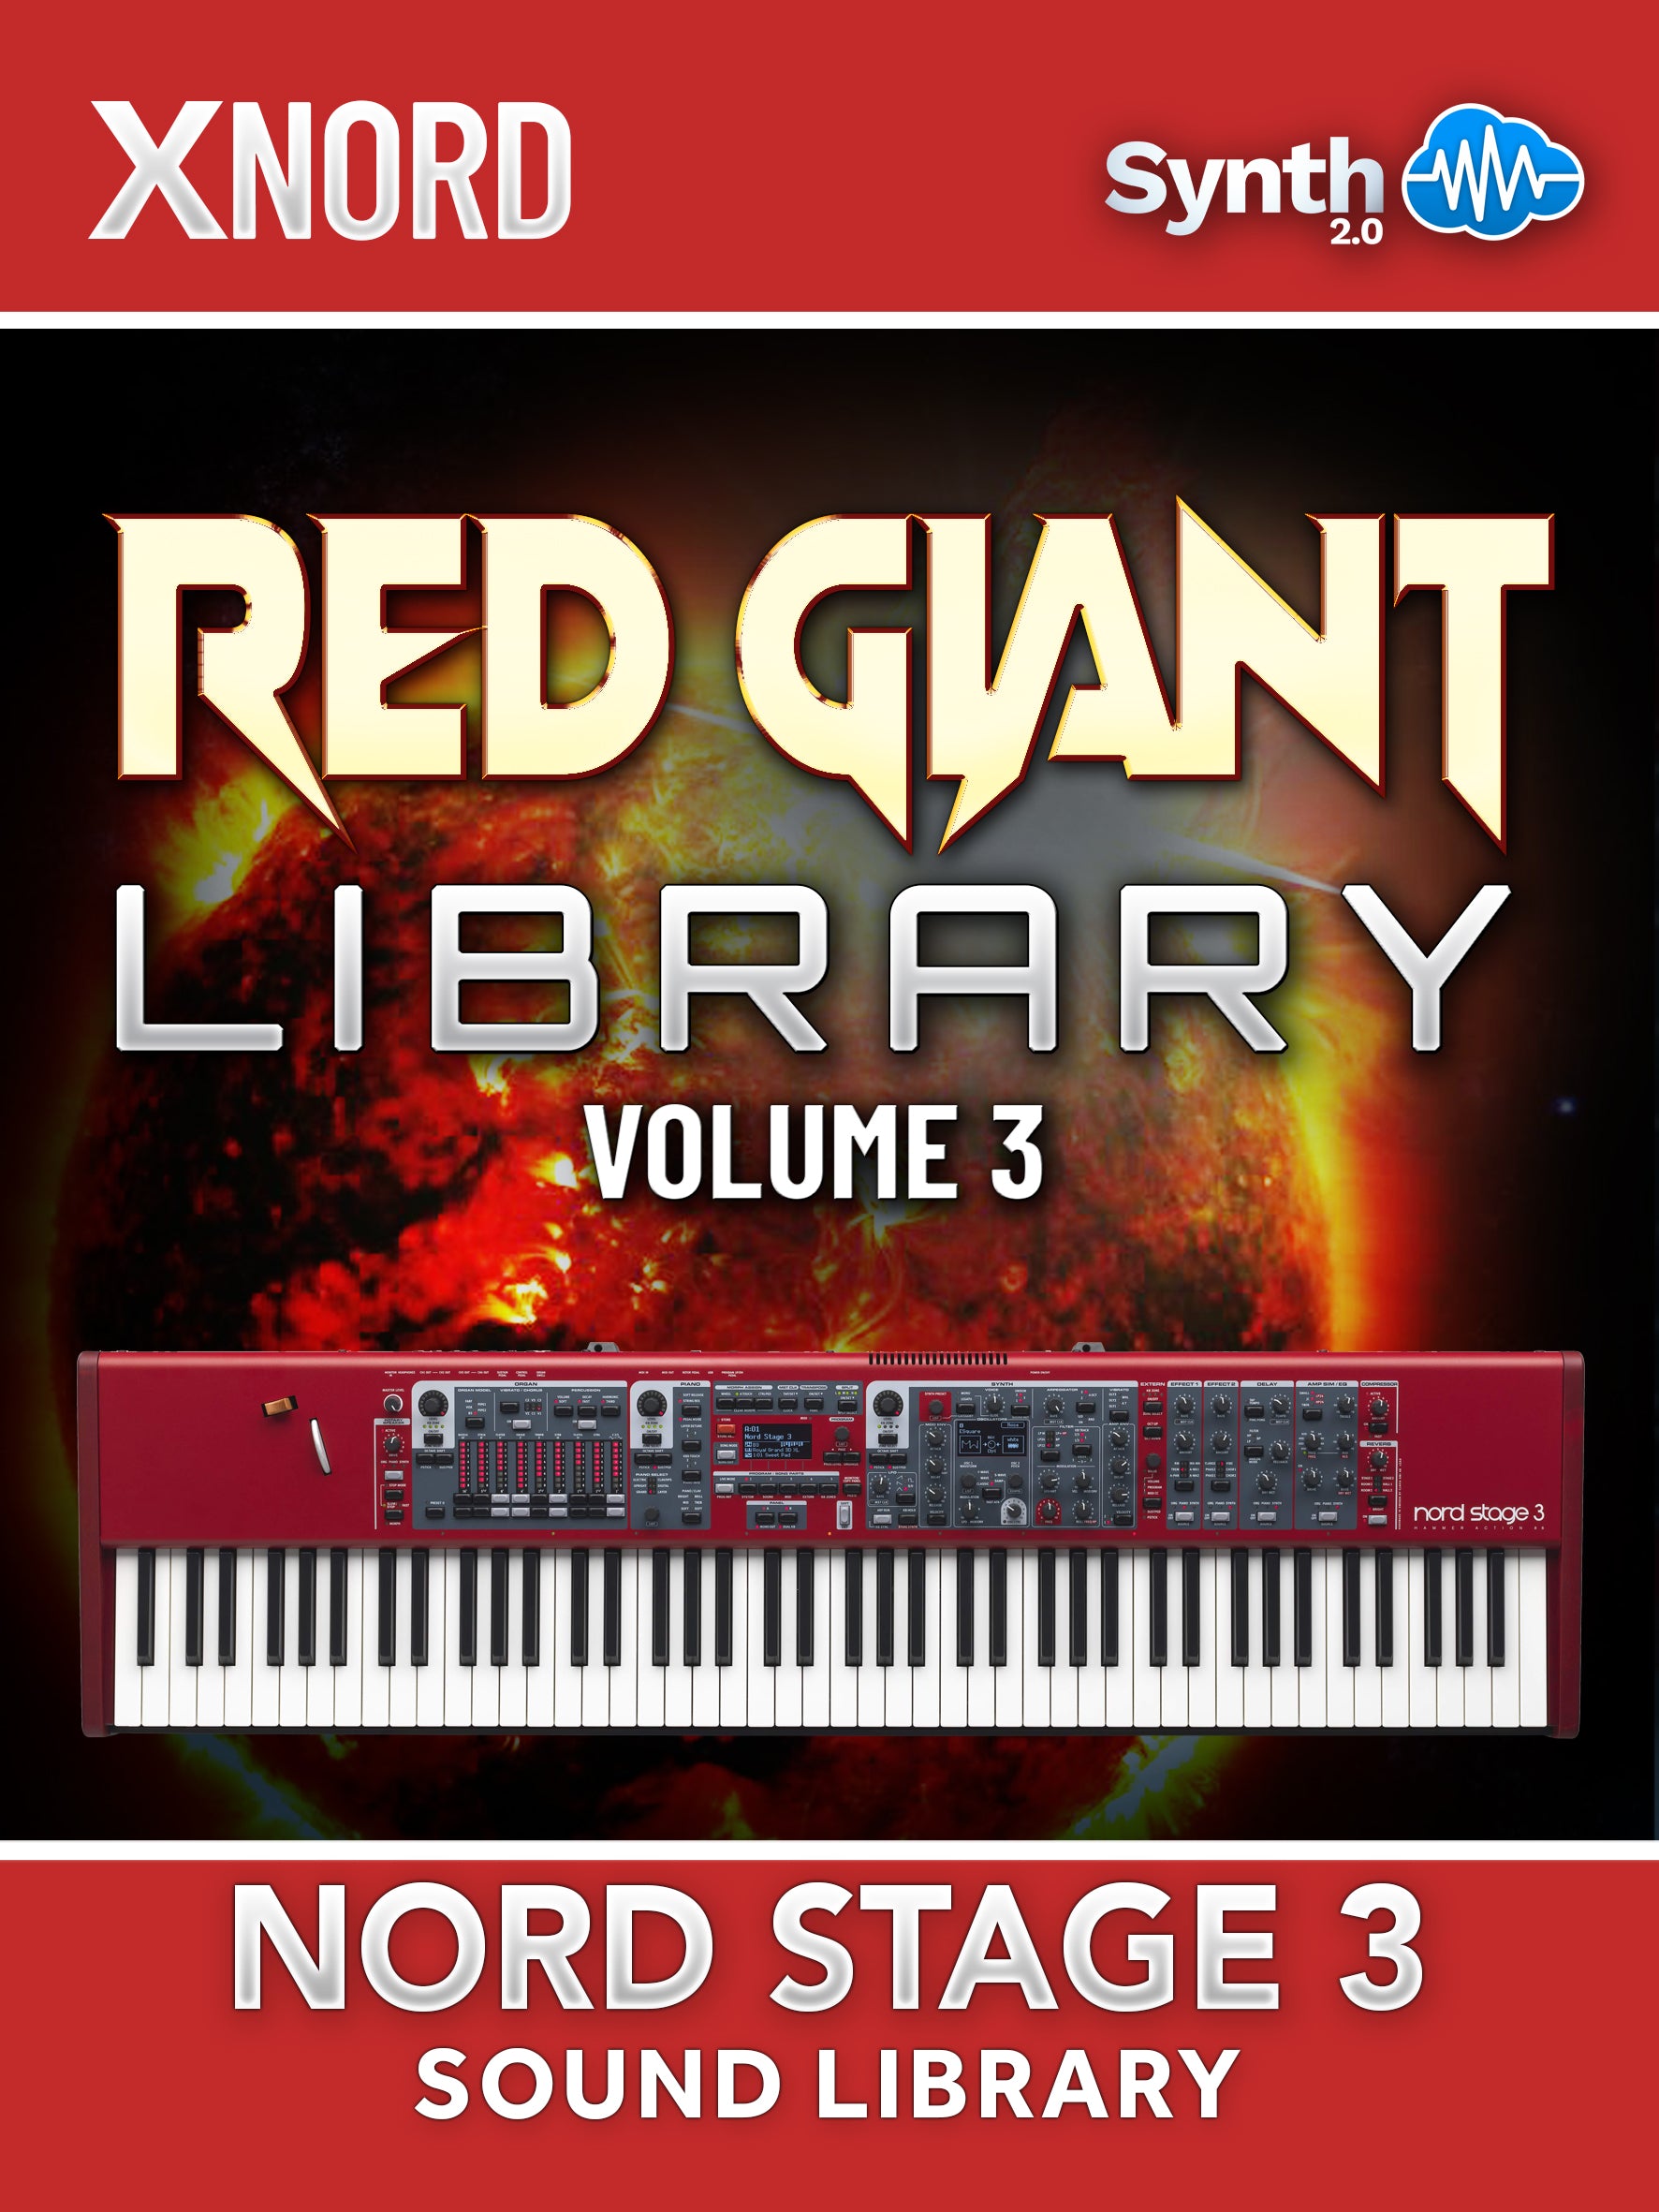 ASL003 - Red Giant Library Vol.3 - Nord Stage 3 ( 42 presets )